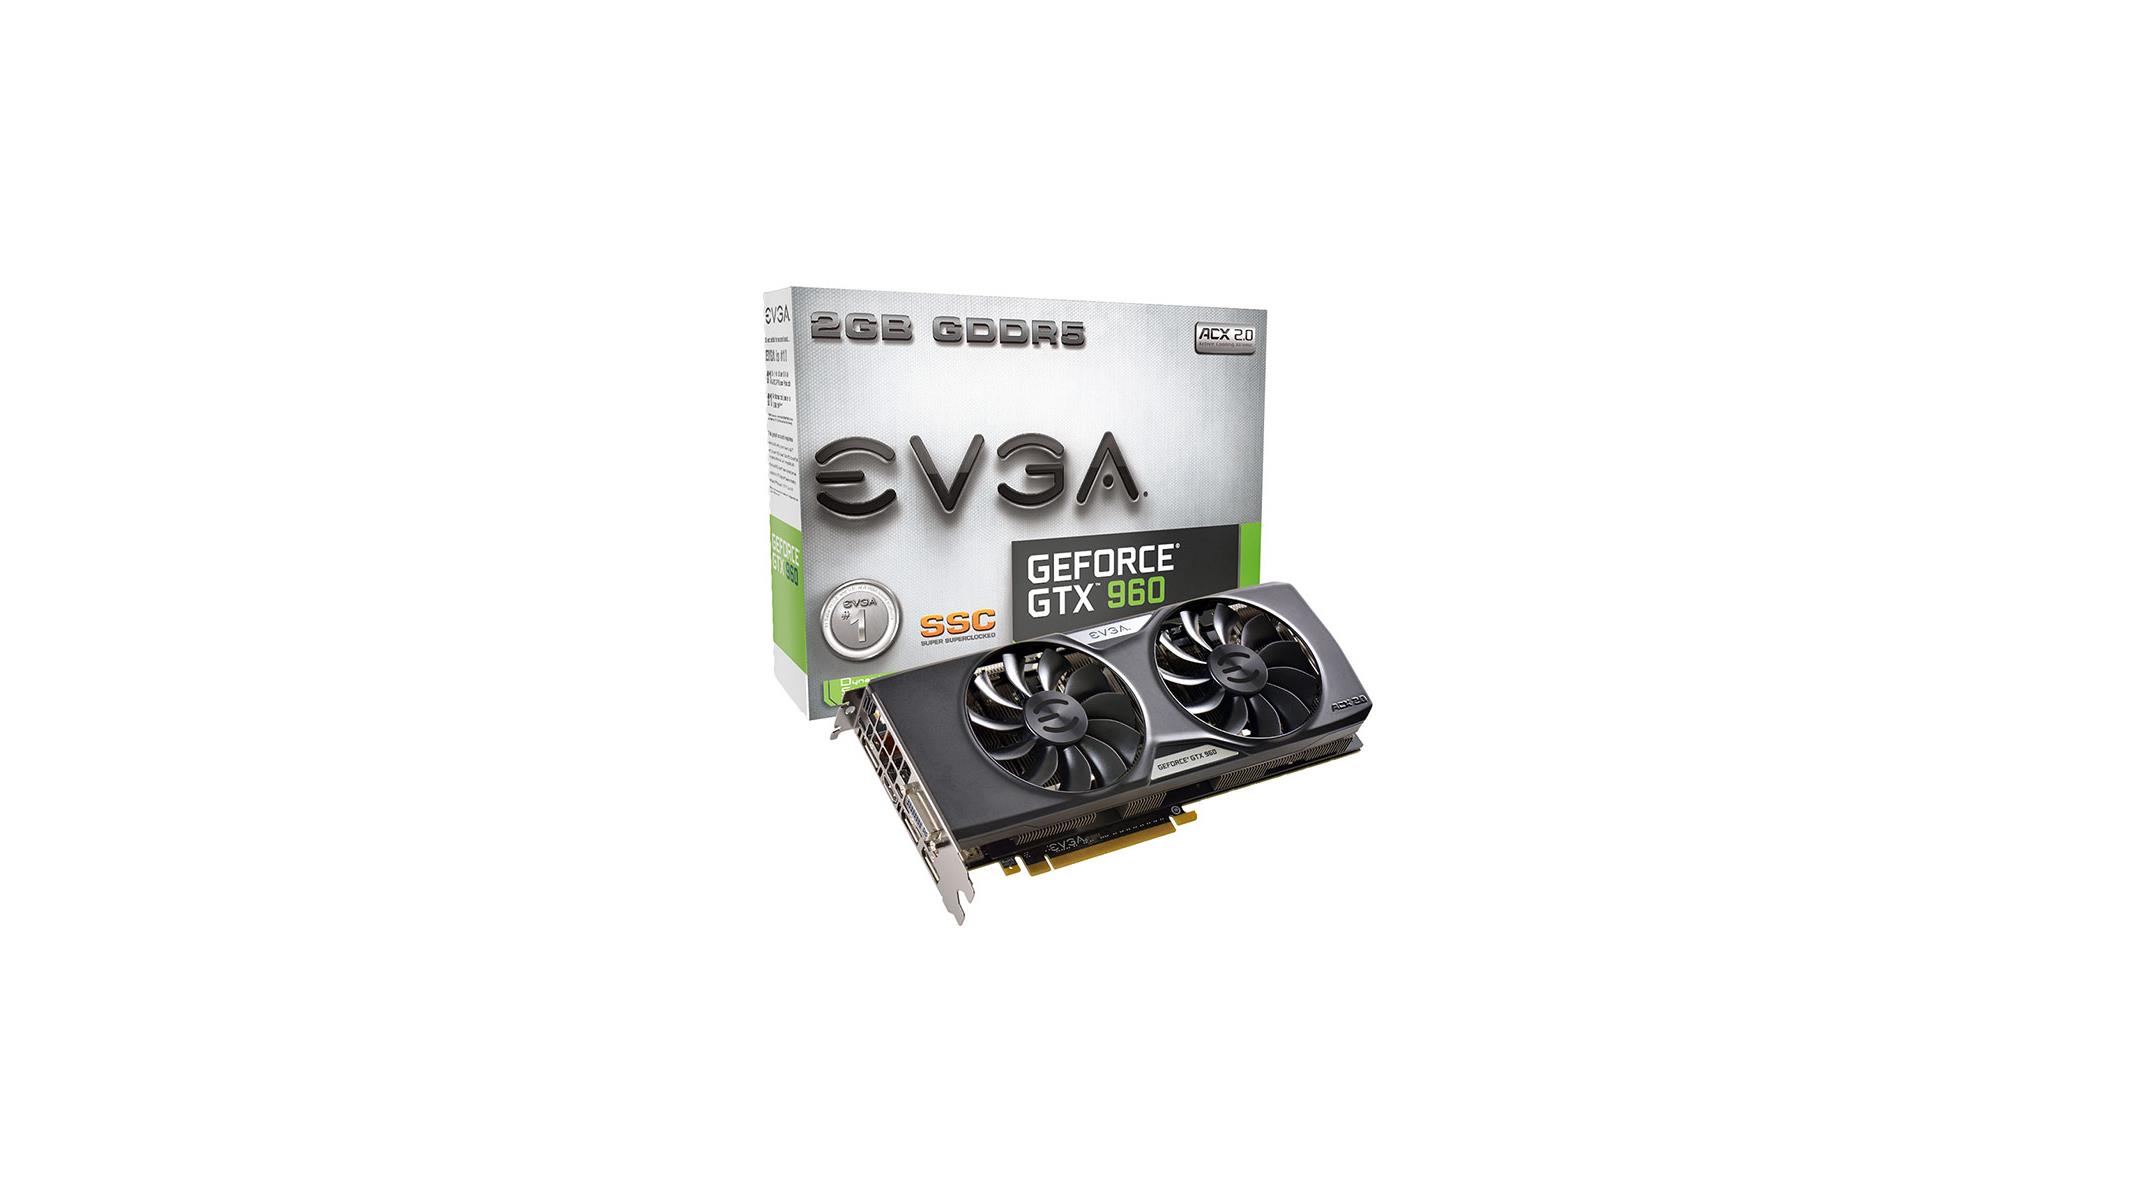 Nvidia Geforce Gtx 960 Review With Evga And Asus Hothardware